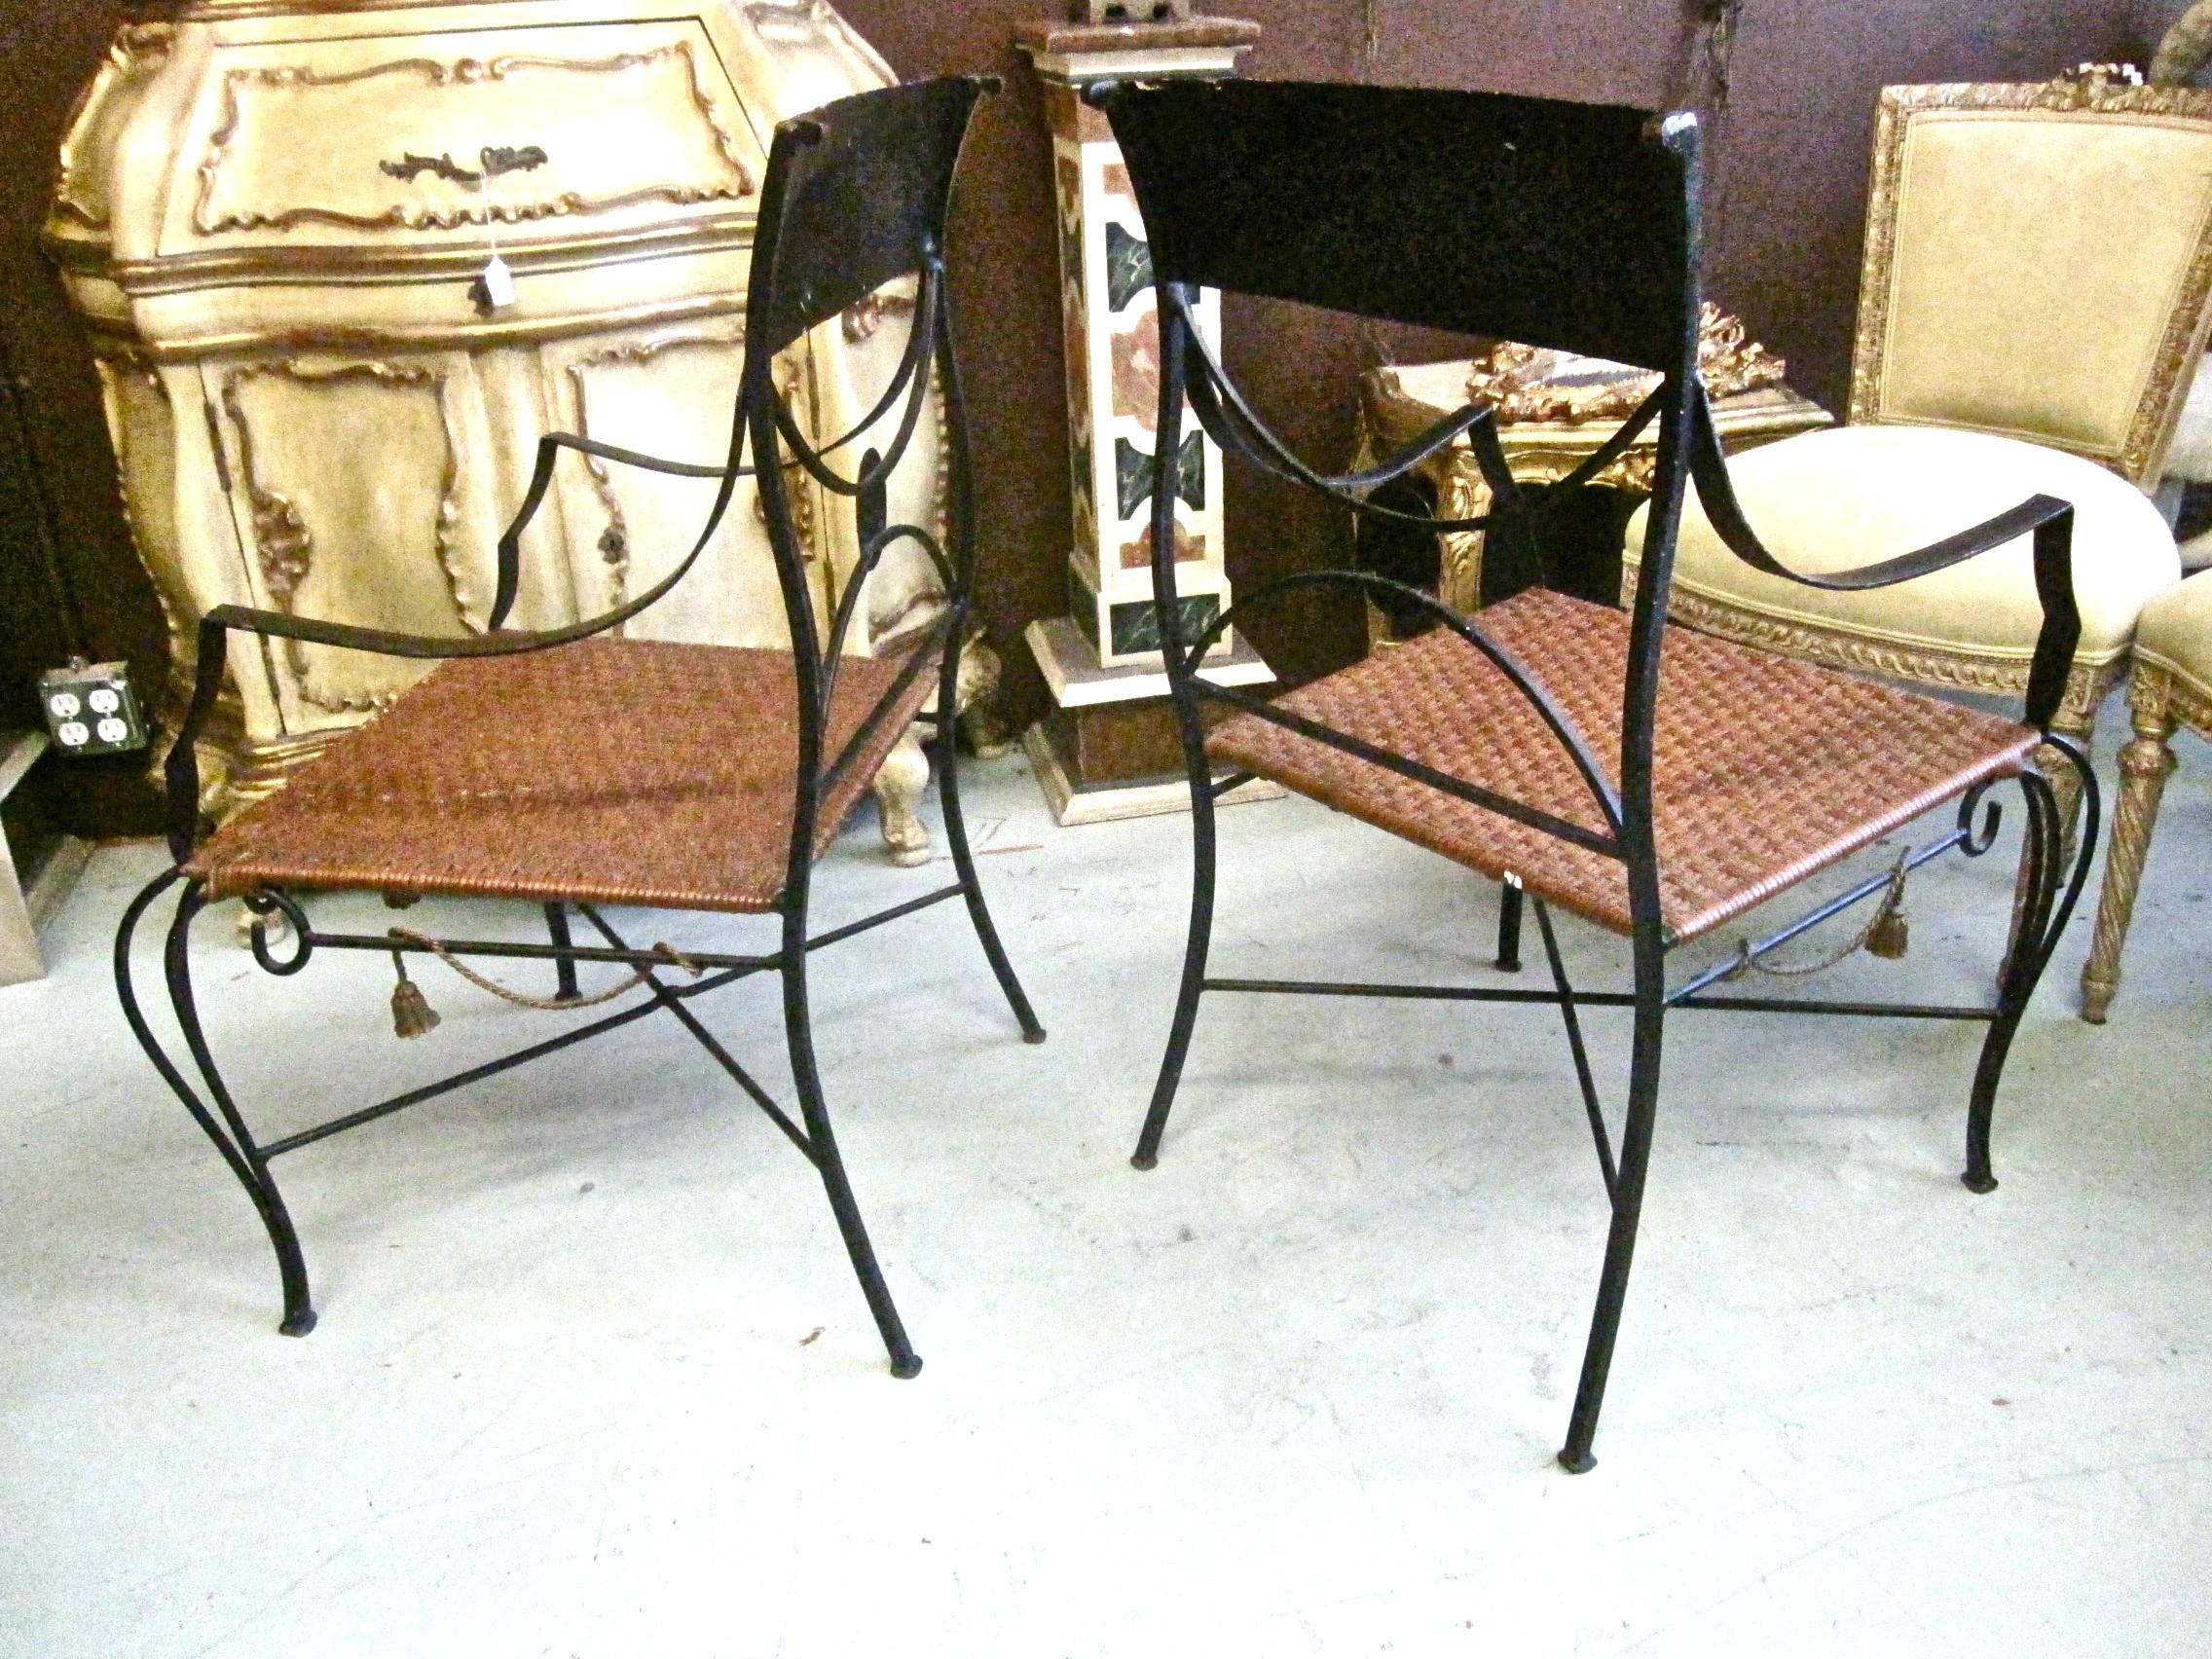 This is a charming pair of circa 1960s Italian painted forged iron and tole arm chairs in a quasi-neoclassical style. The down scrolling arms and modified klismos form echo early 19th century French iron pieces, but then you come to the funky iron